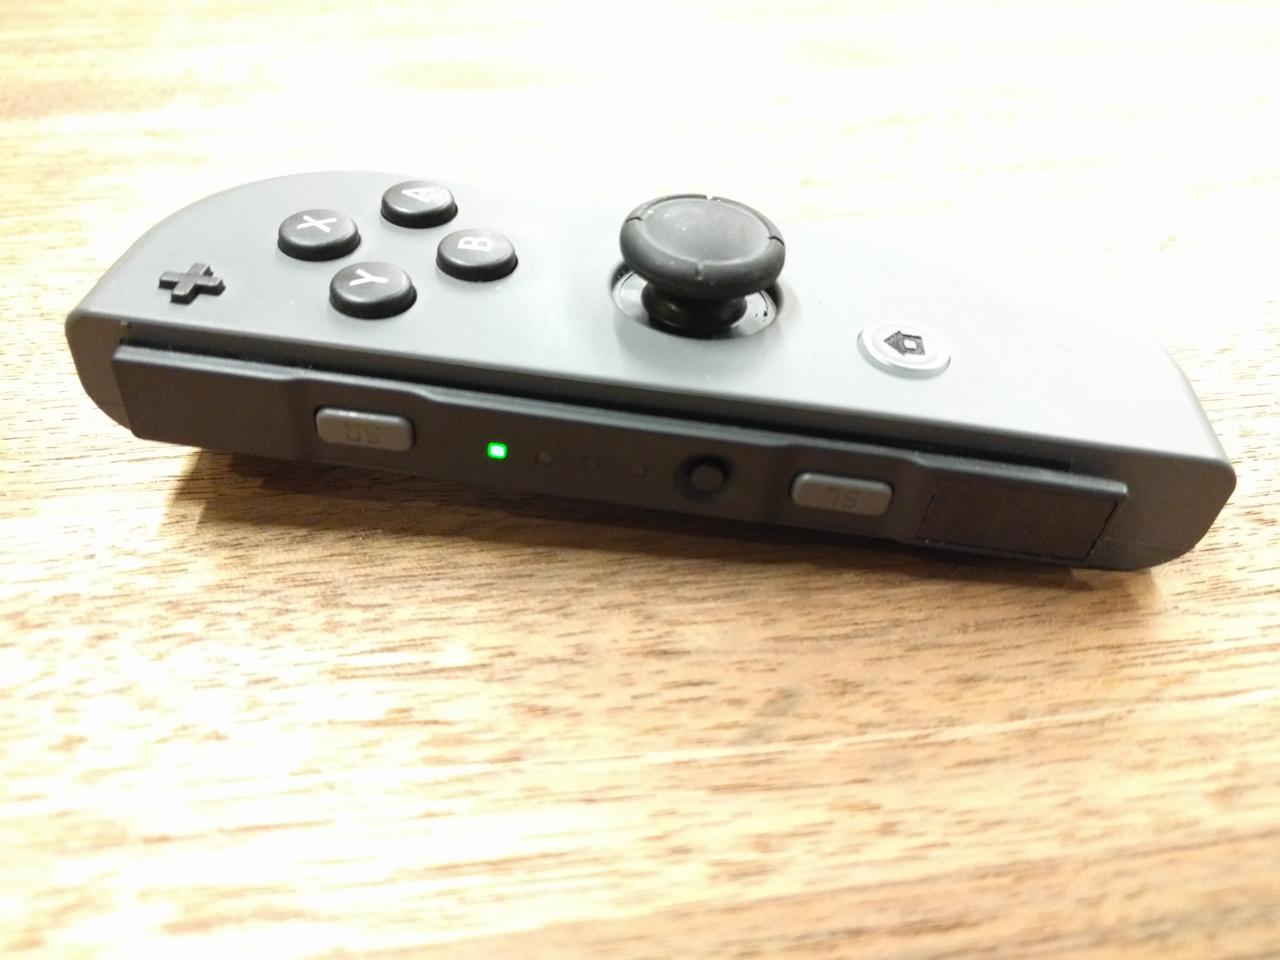 The Joy-Cons both offer four LED lights to indicate controller battery life.